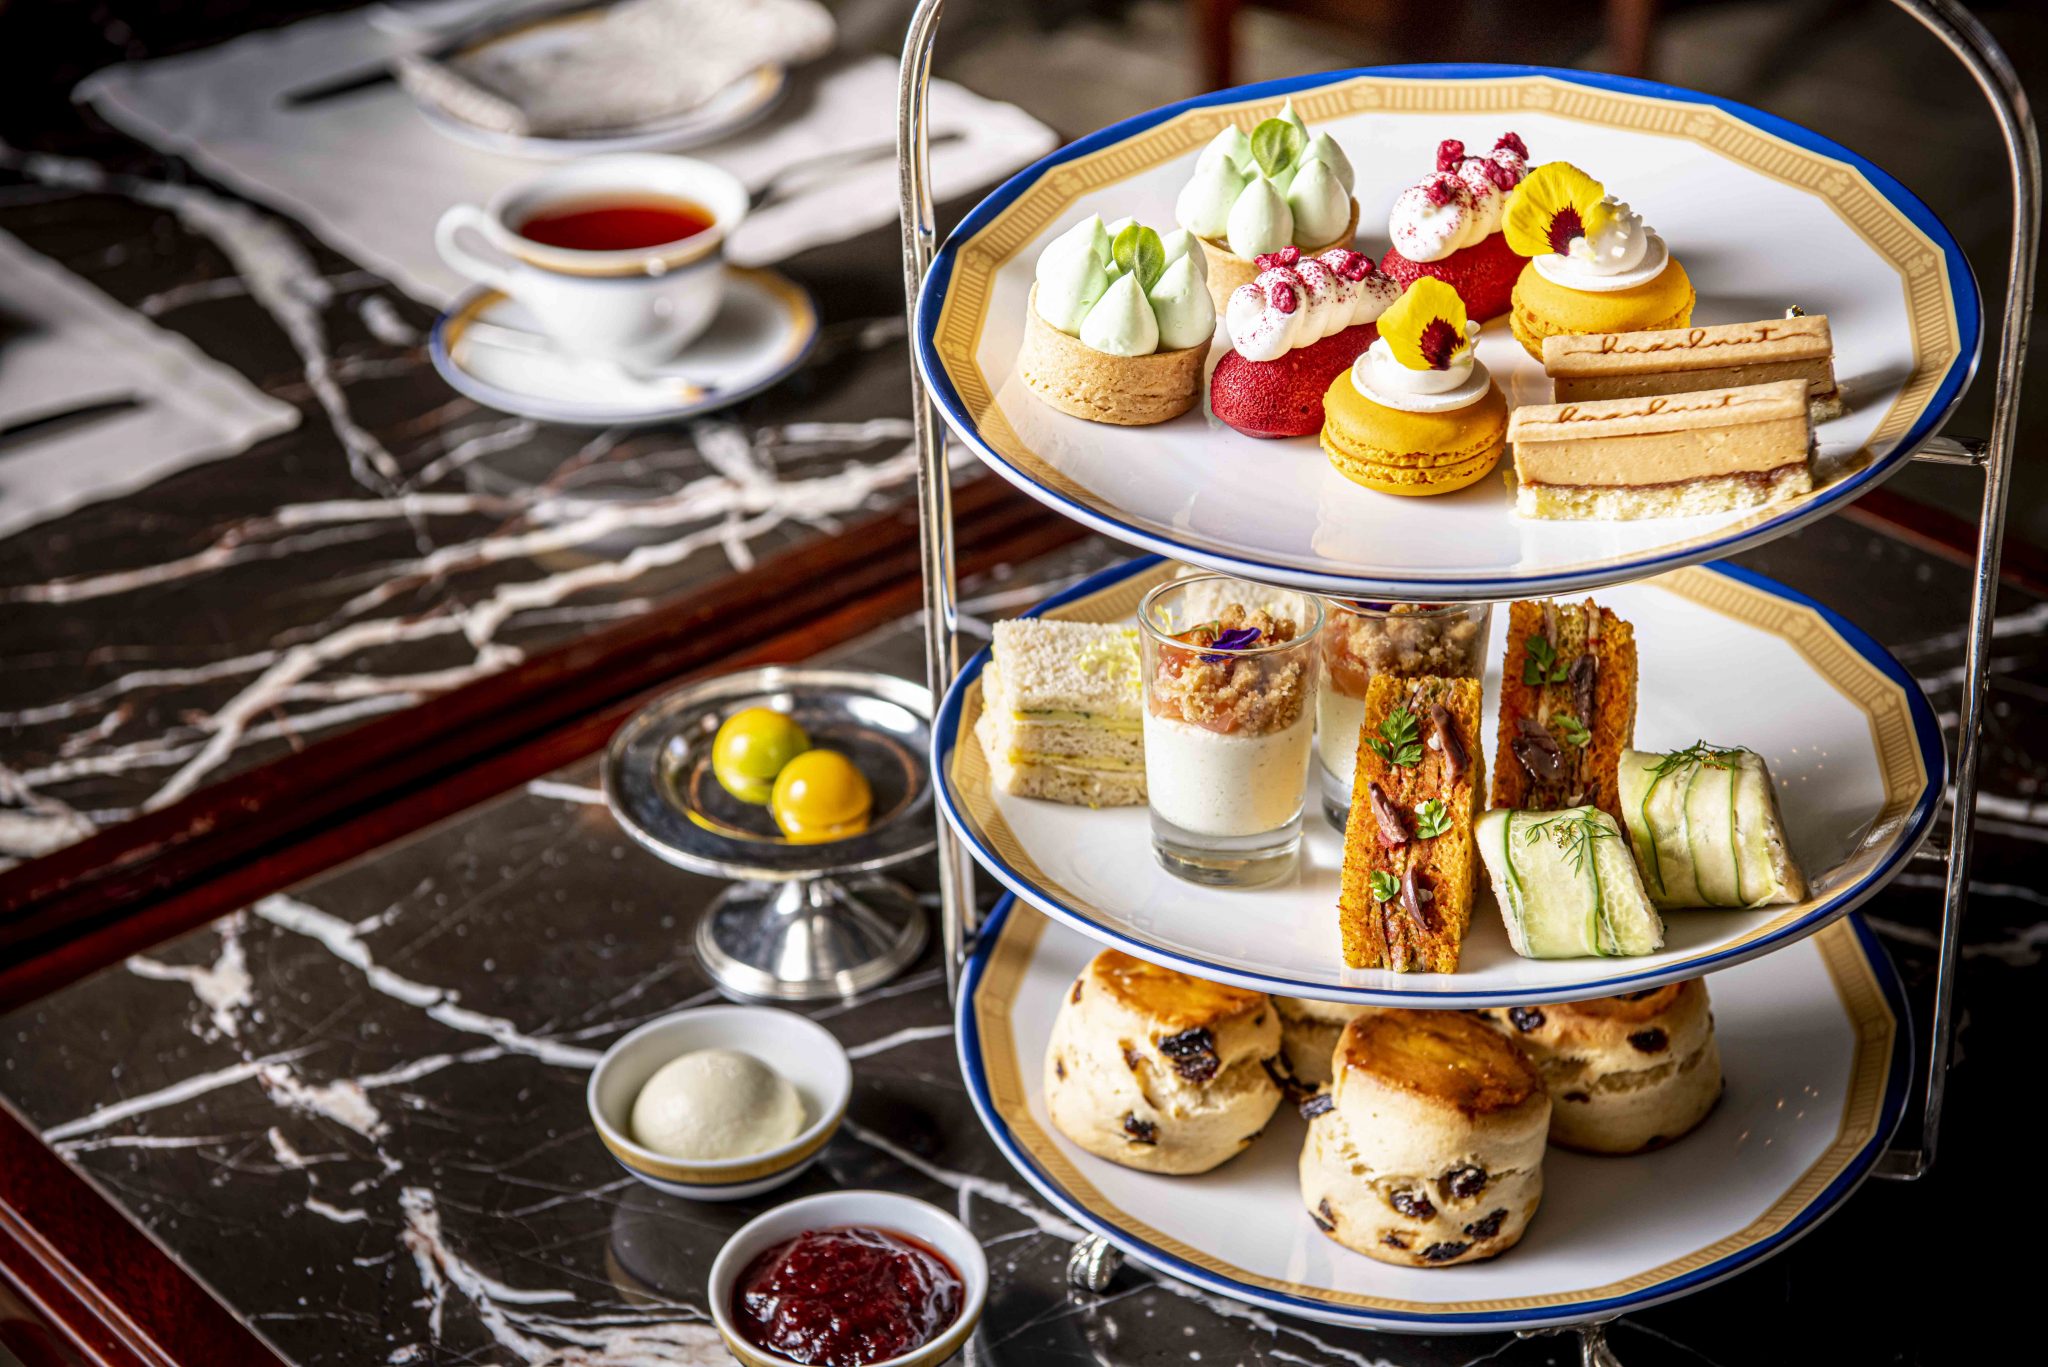 10 best takeaway afternoon tea sets in Hong Kong Hashtag Legend